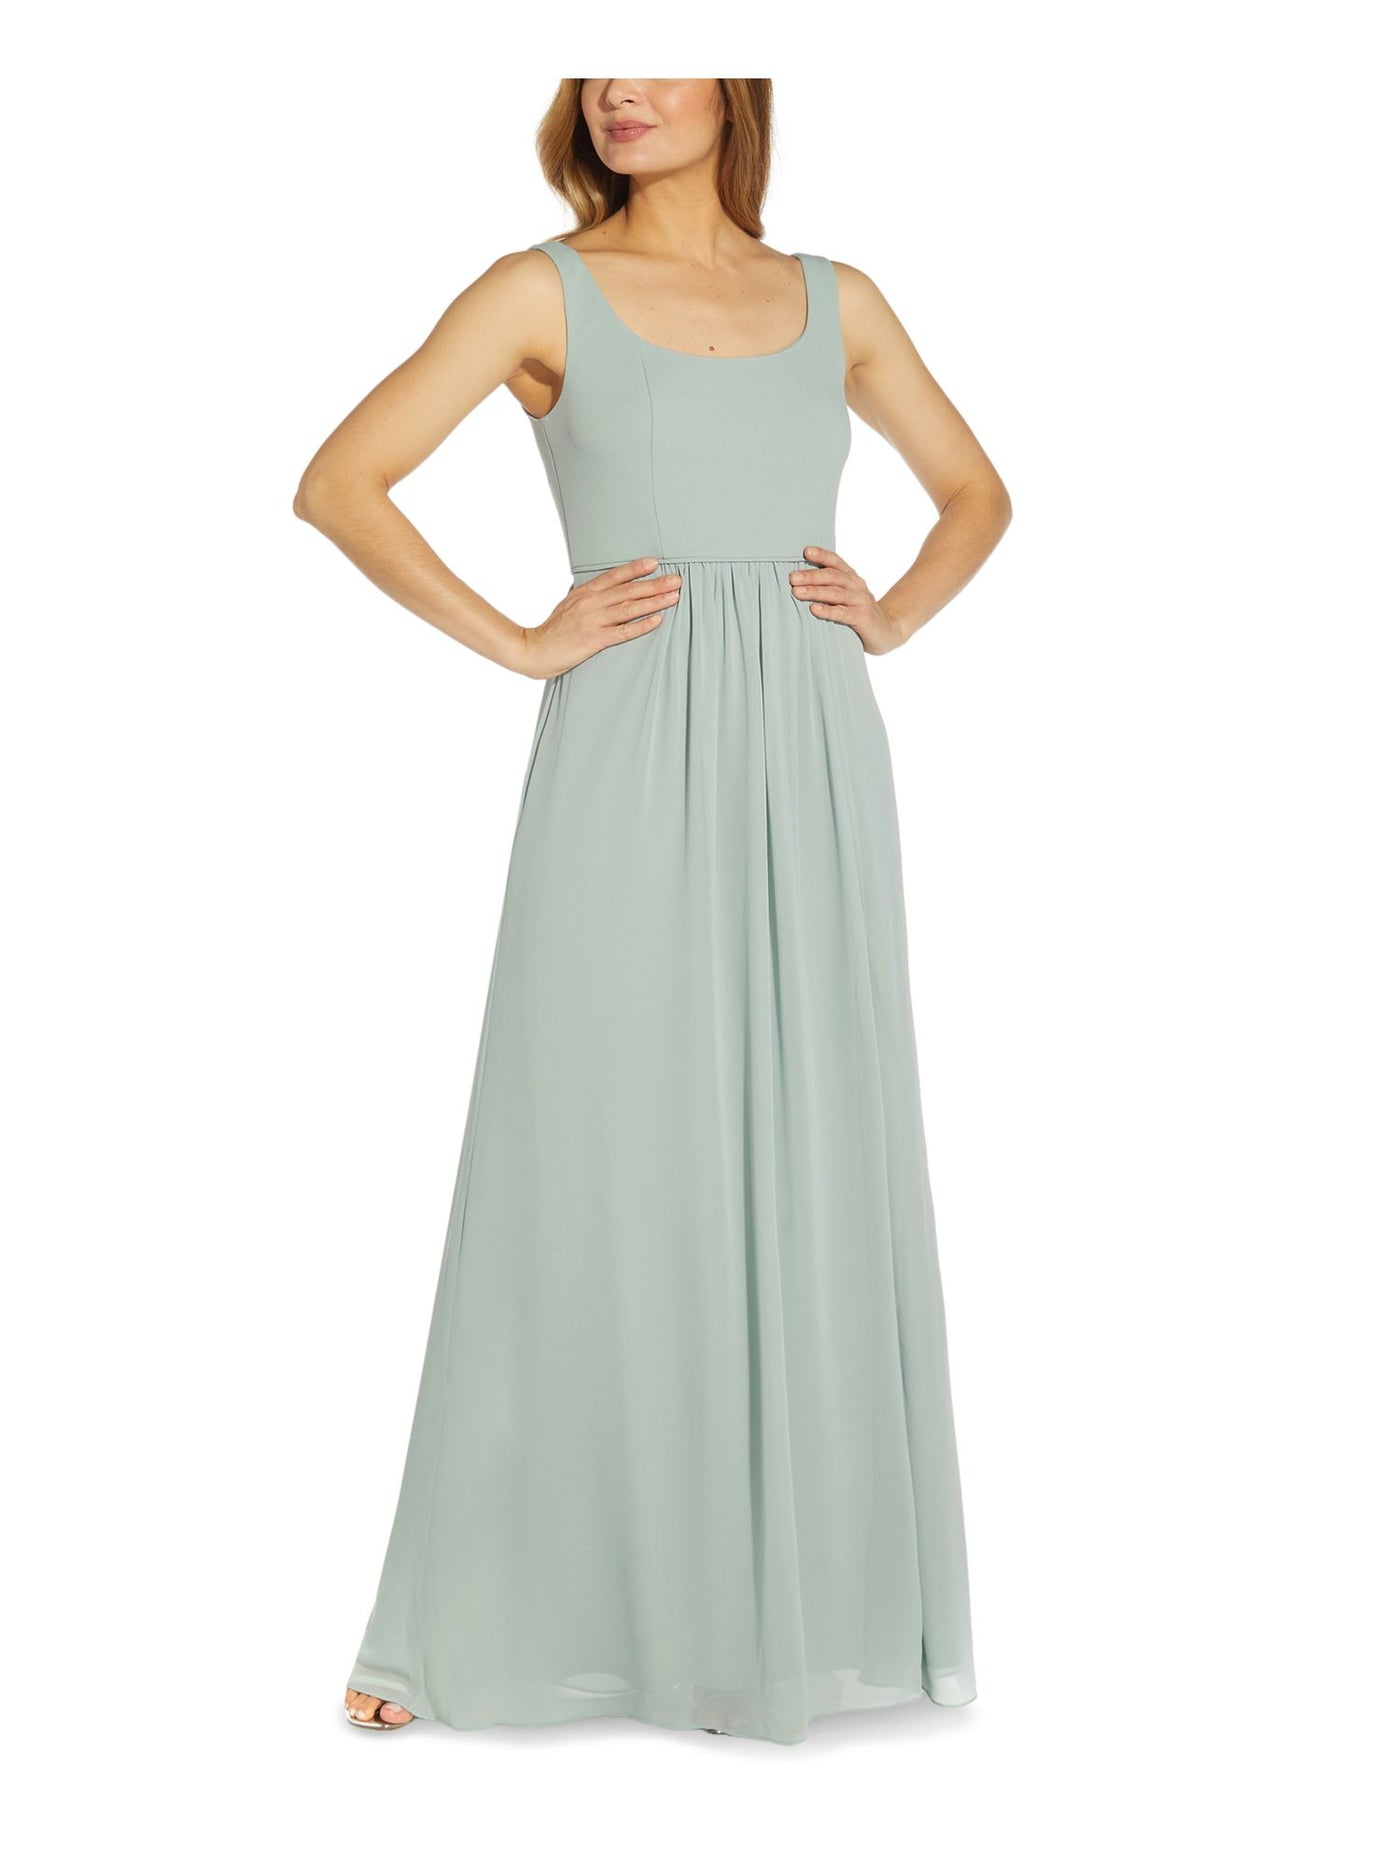 ADRIANNA PAPELL Womens Light Blue Stretch Slitted Zippered Sheer Lined Sleeveless Square Neck Full-Length Evening Gown Dress 4